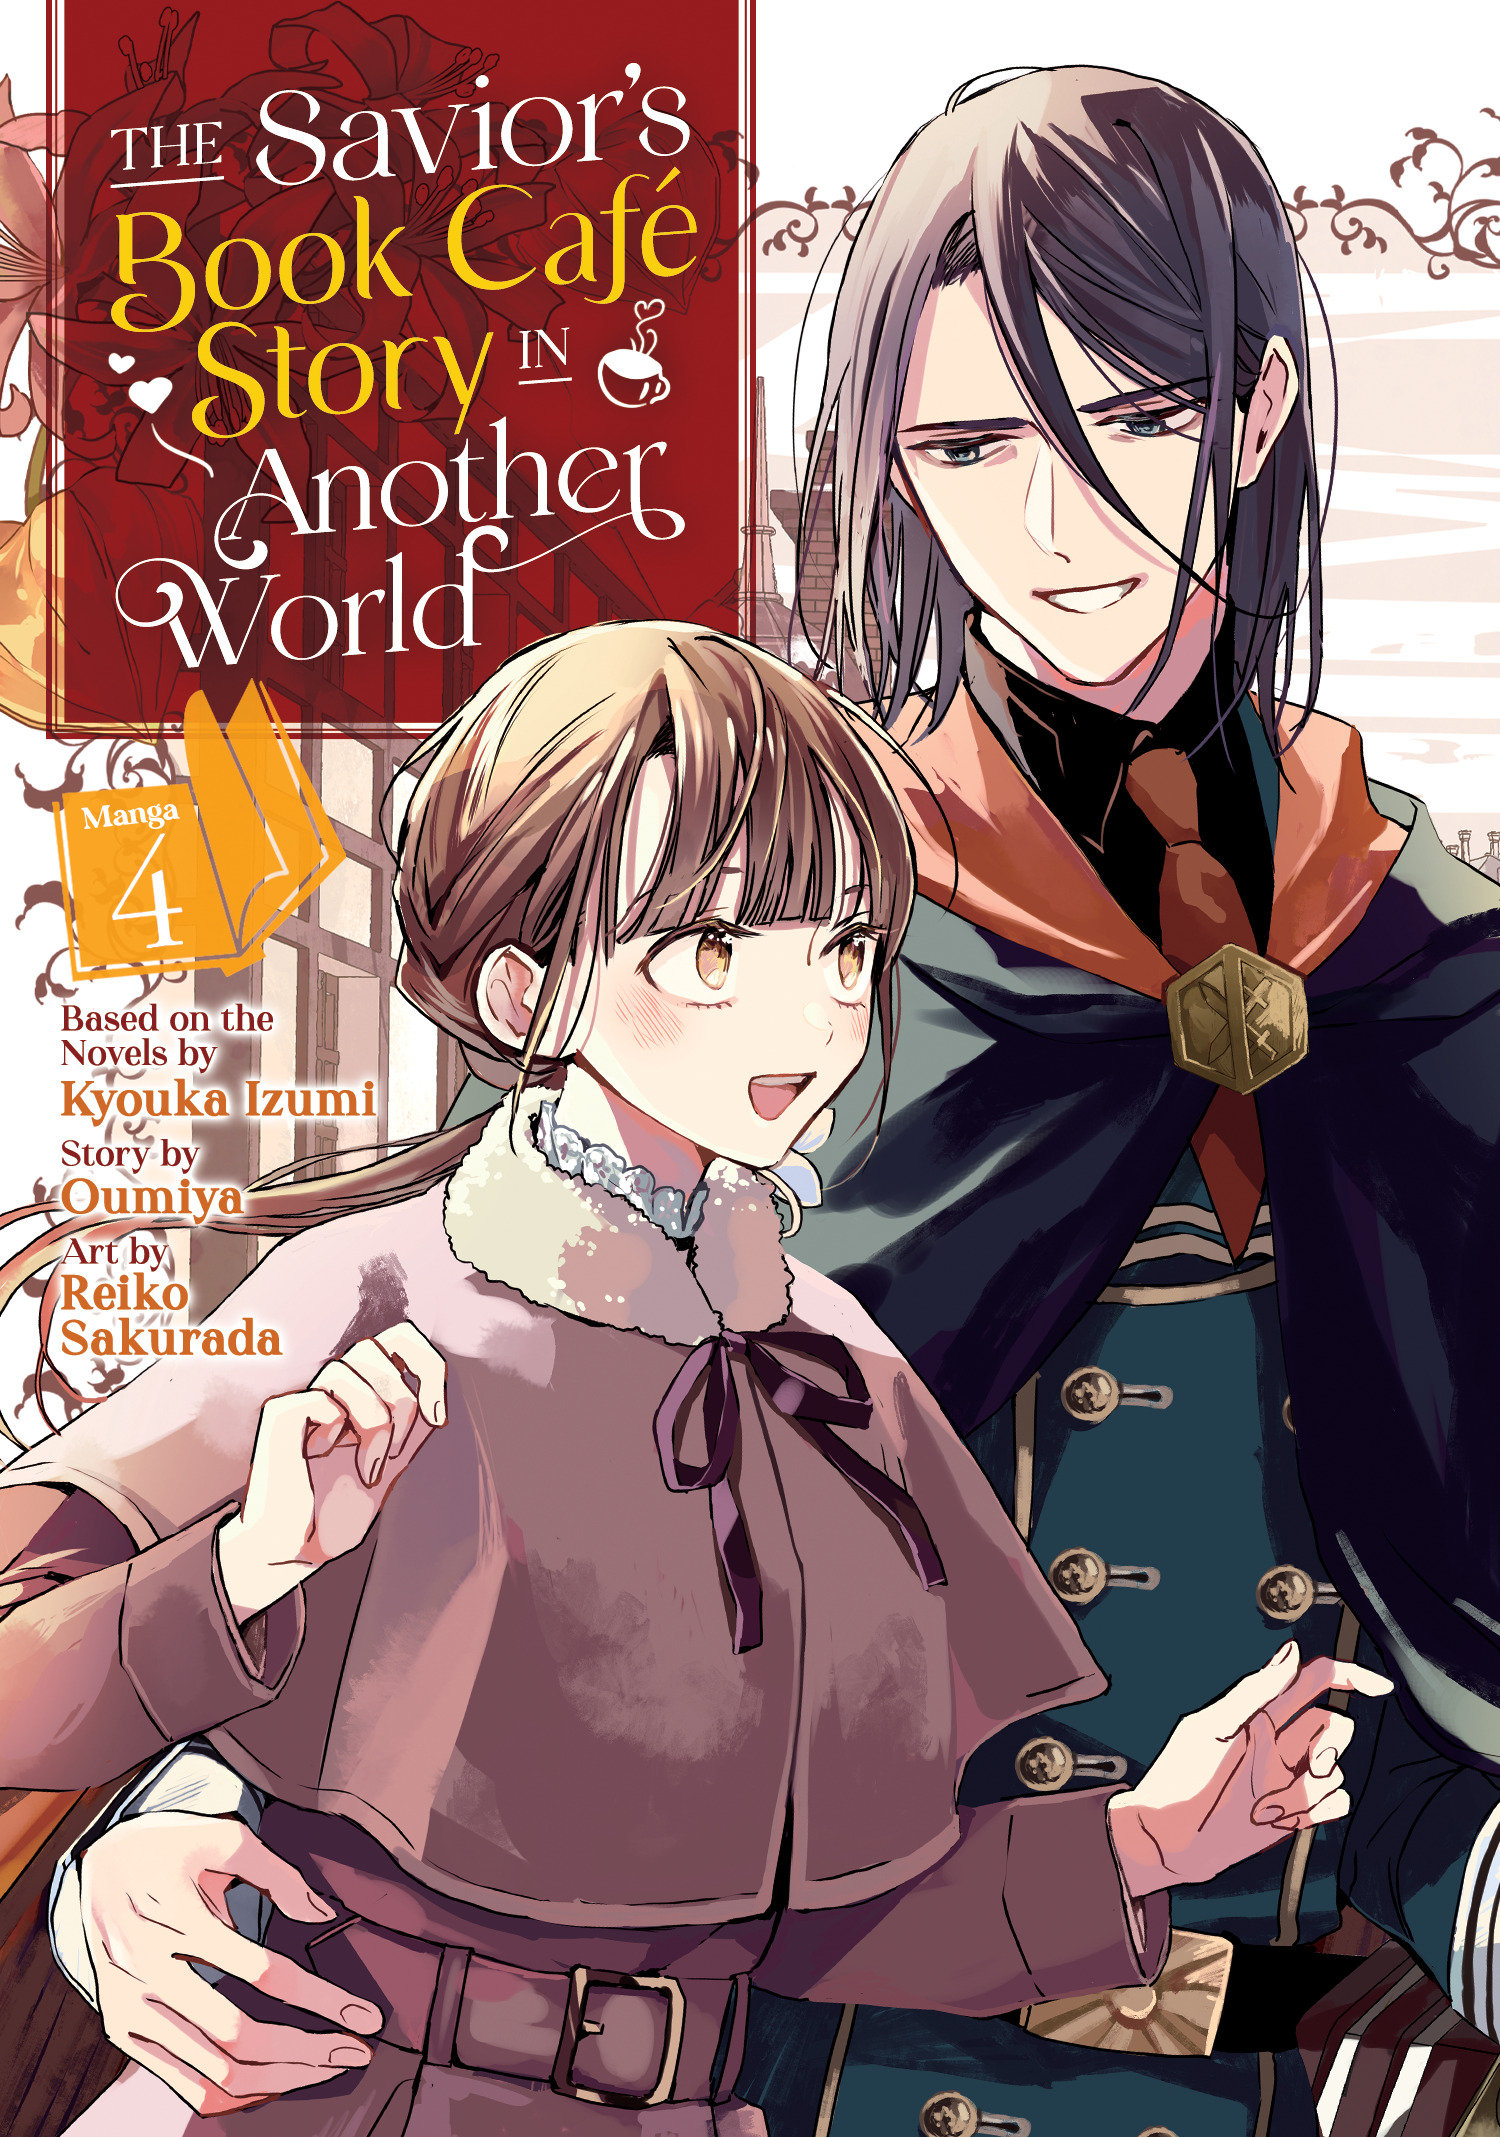 The Savior's Book Café Story In Another World Graphic Novel Volume 4